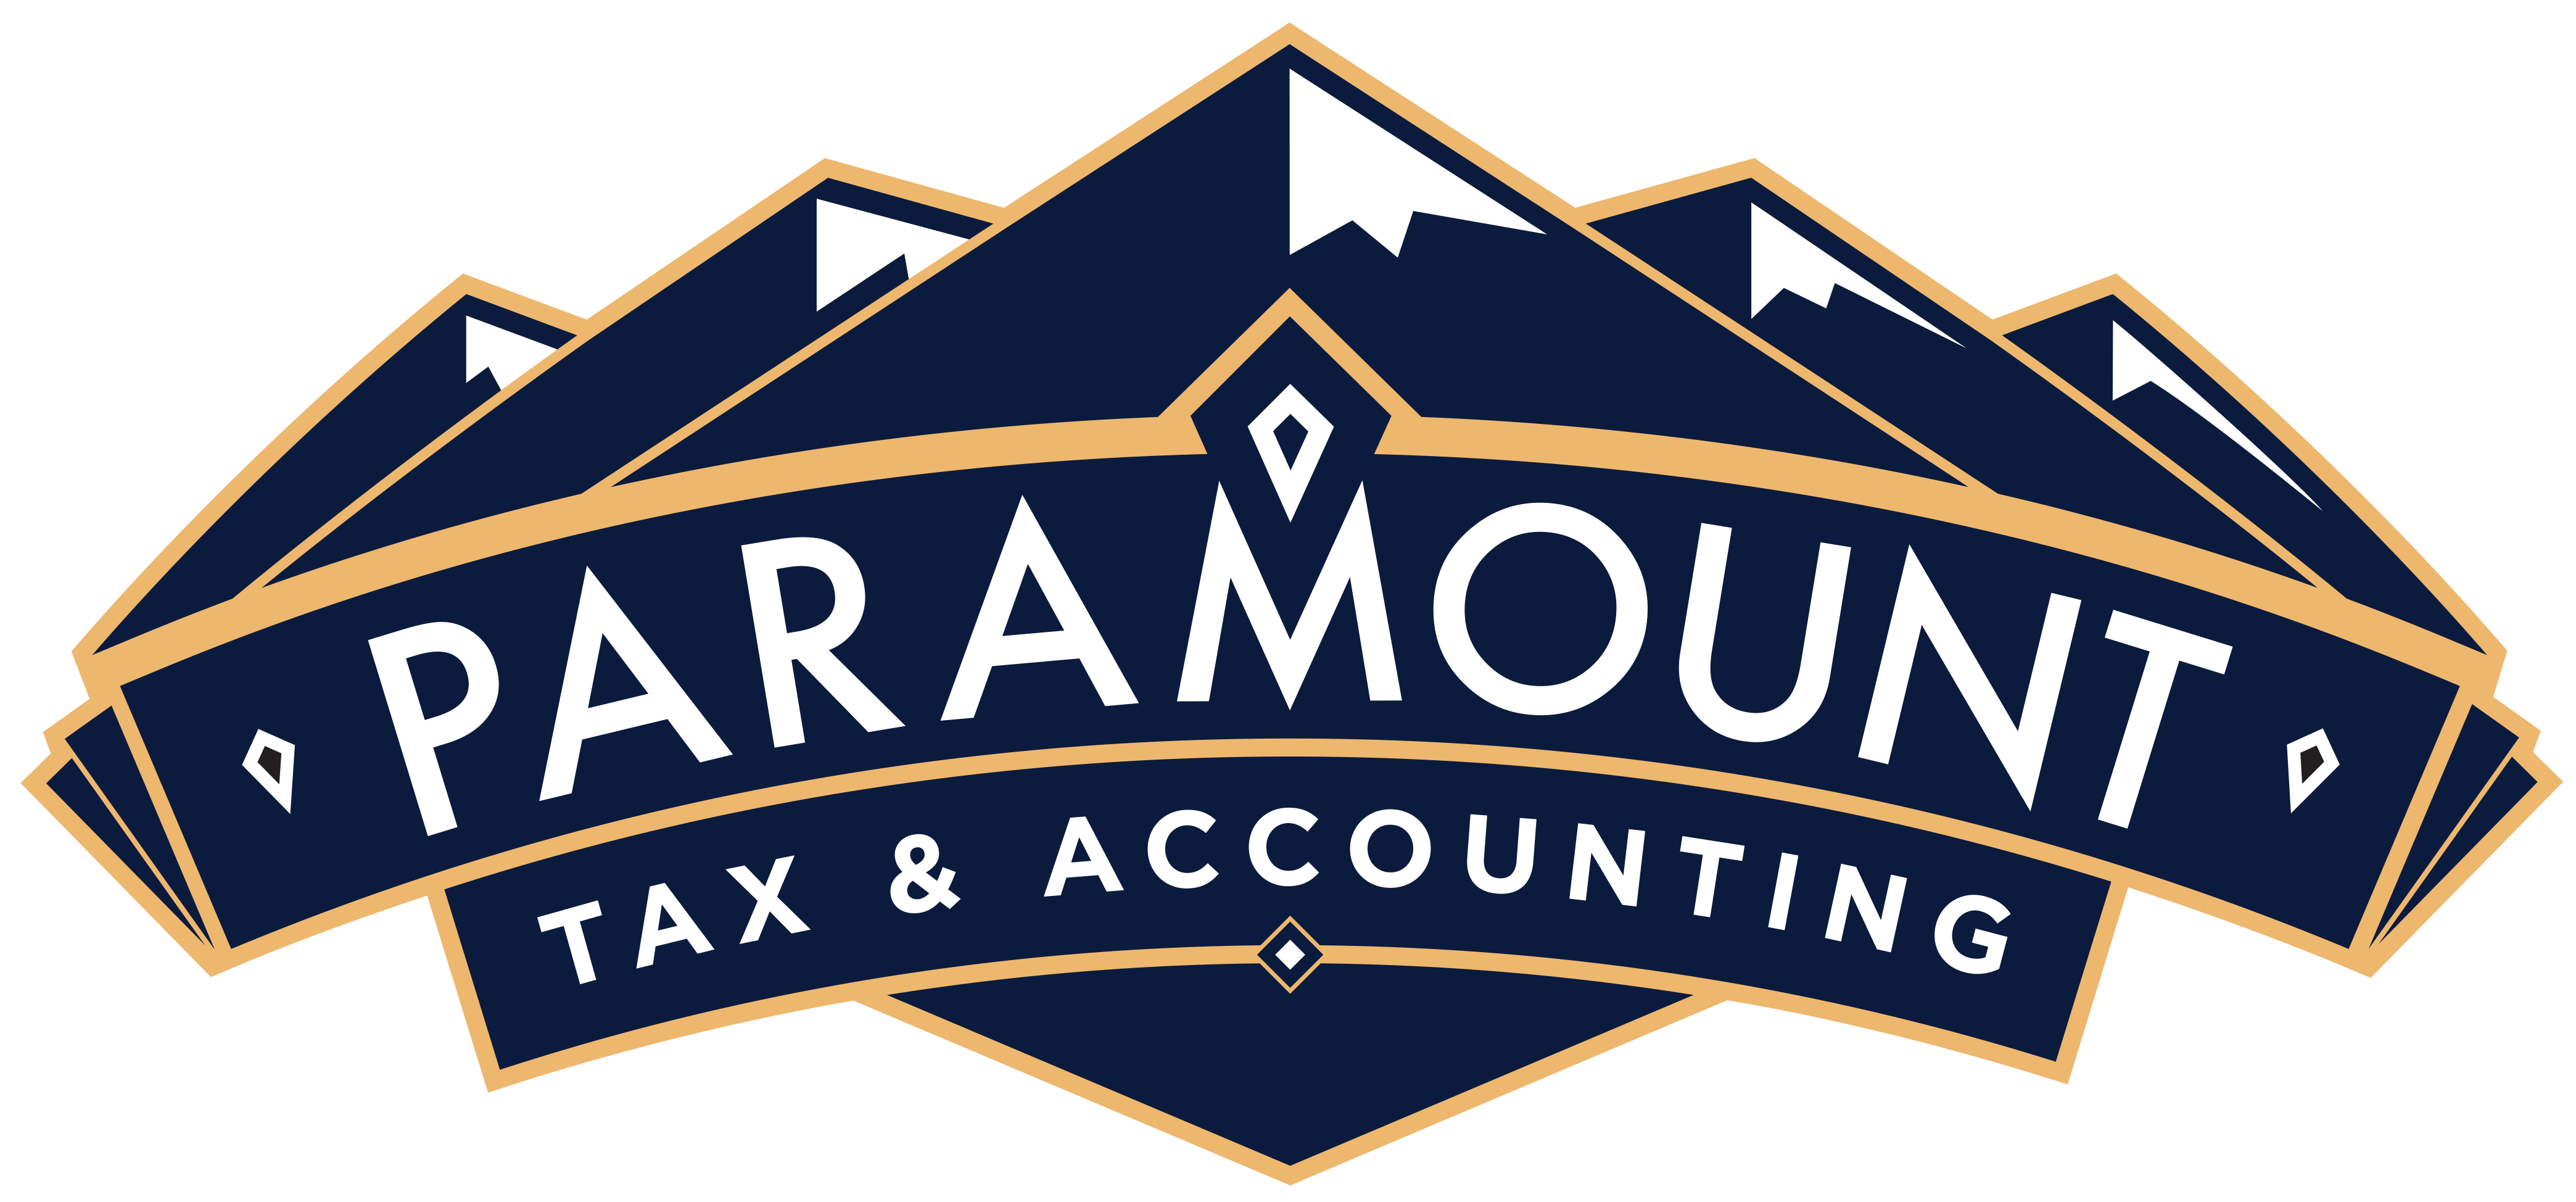 Review Paramount Tax & Accounting in Gilbert